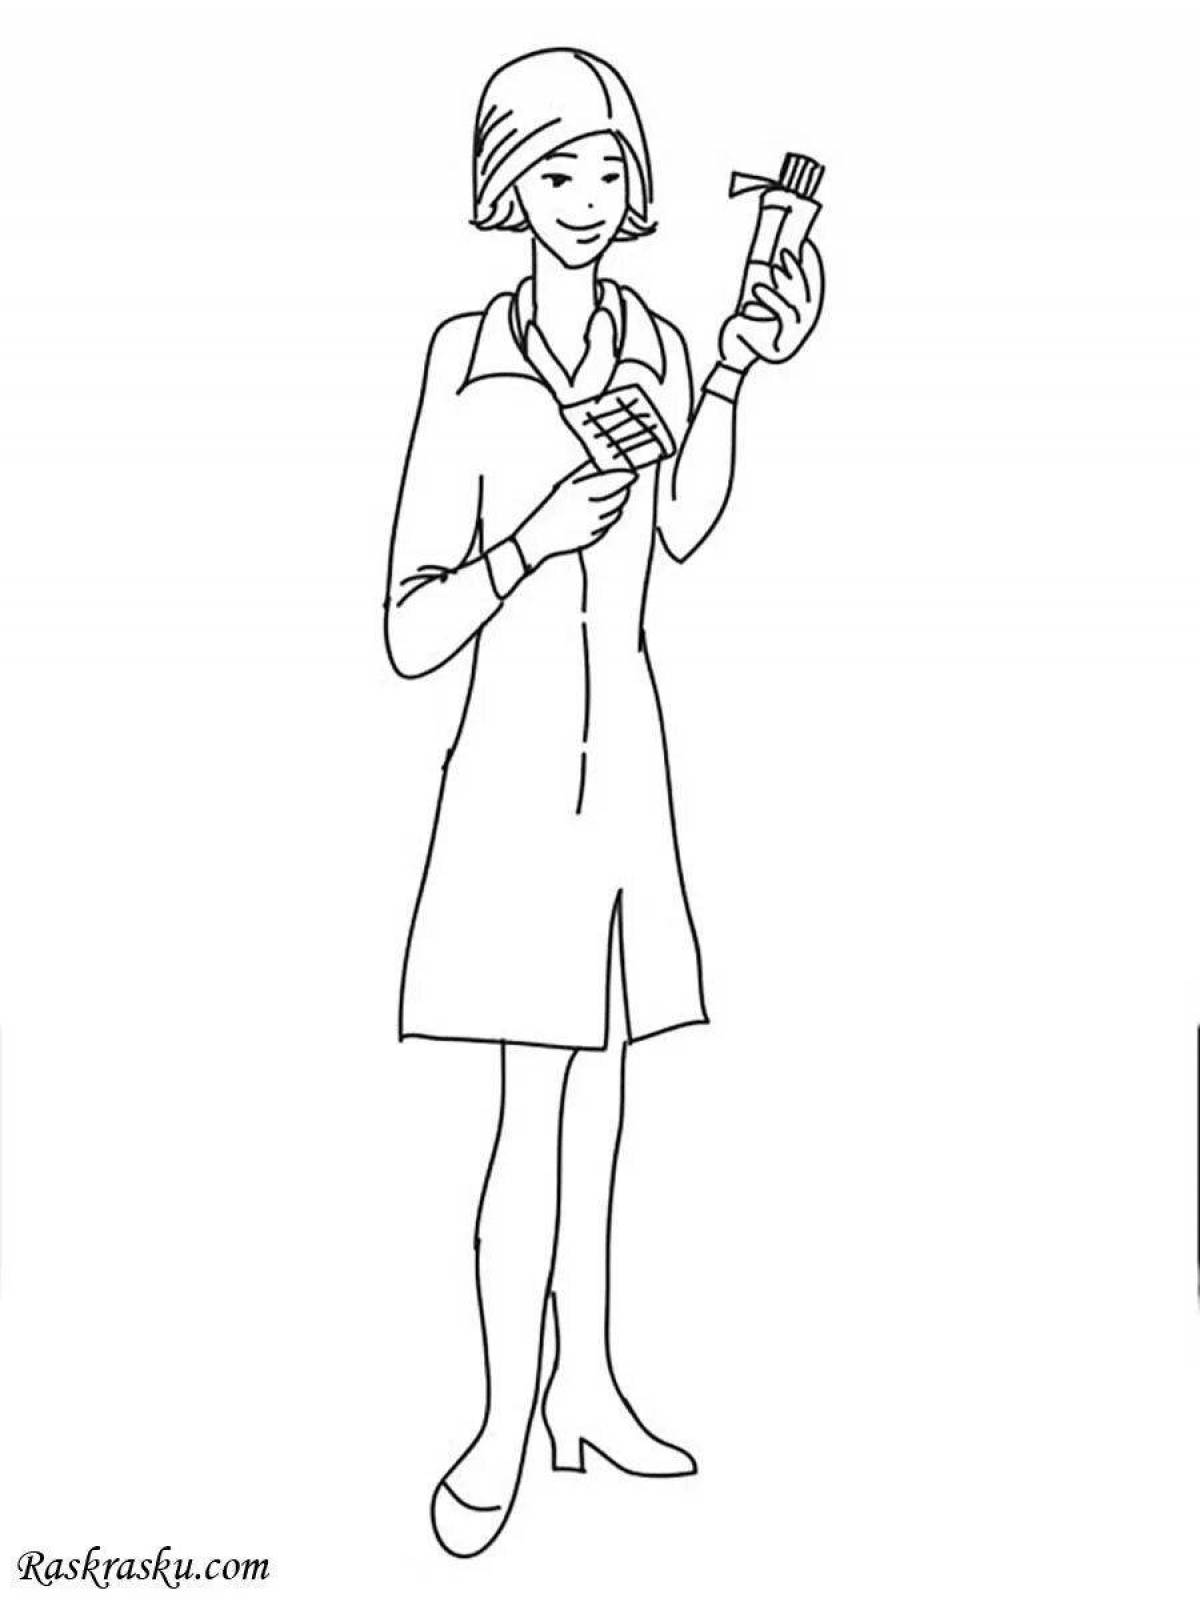 Attracting a pharmacist coloring book